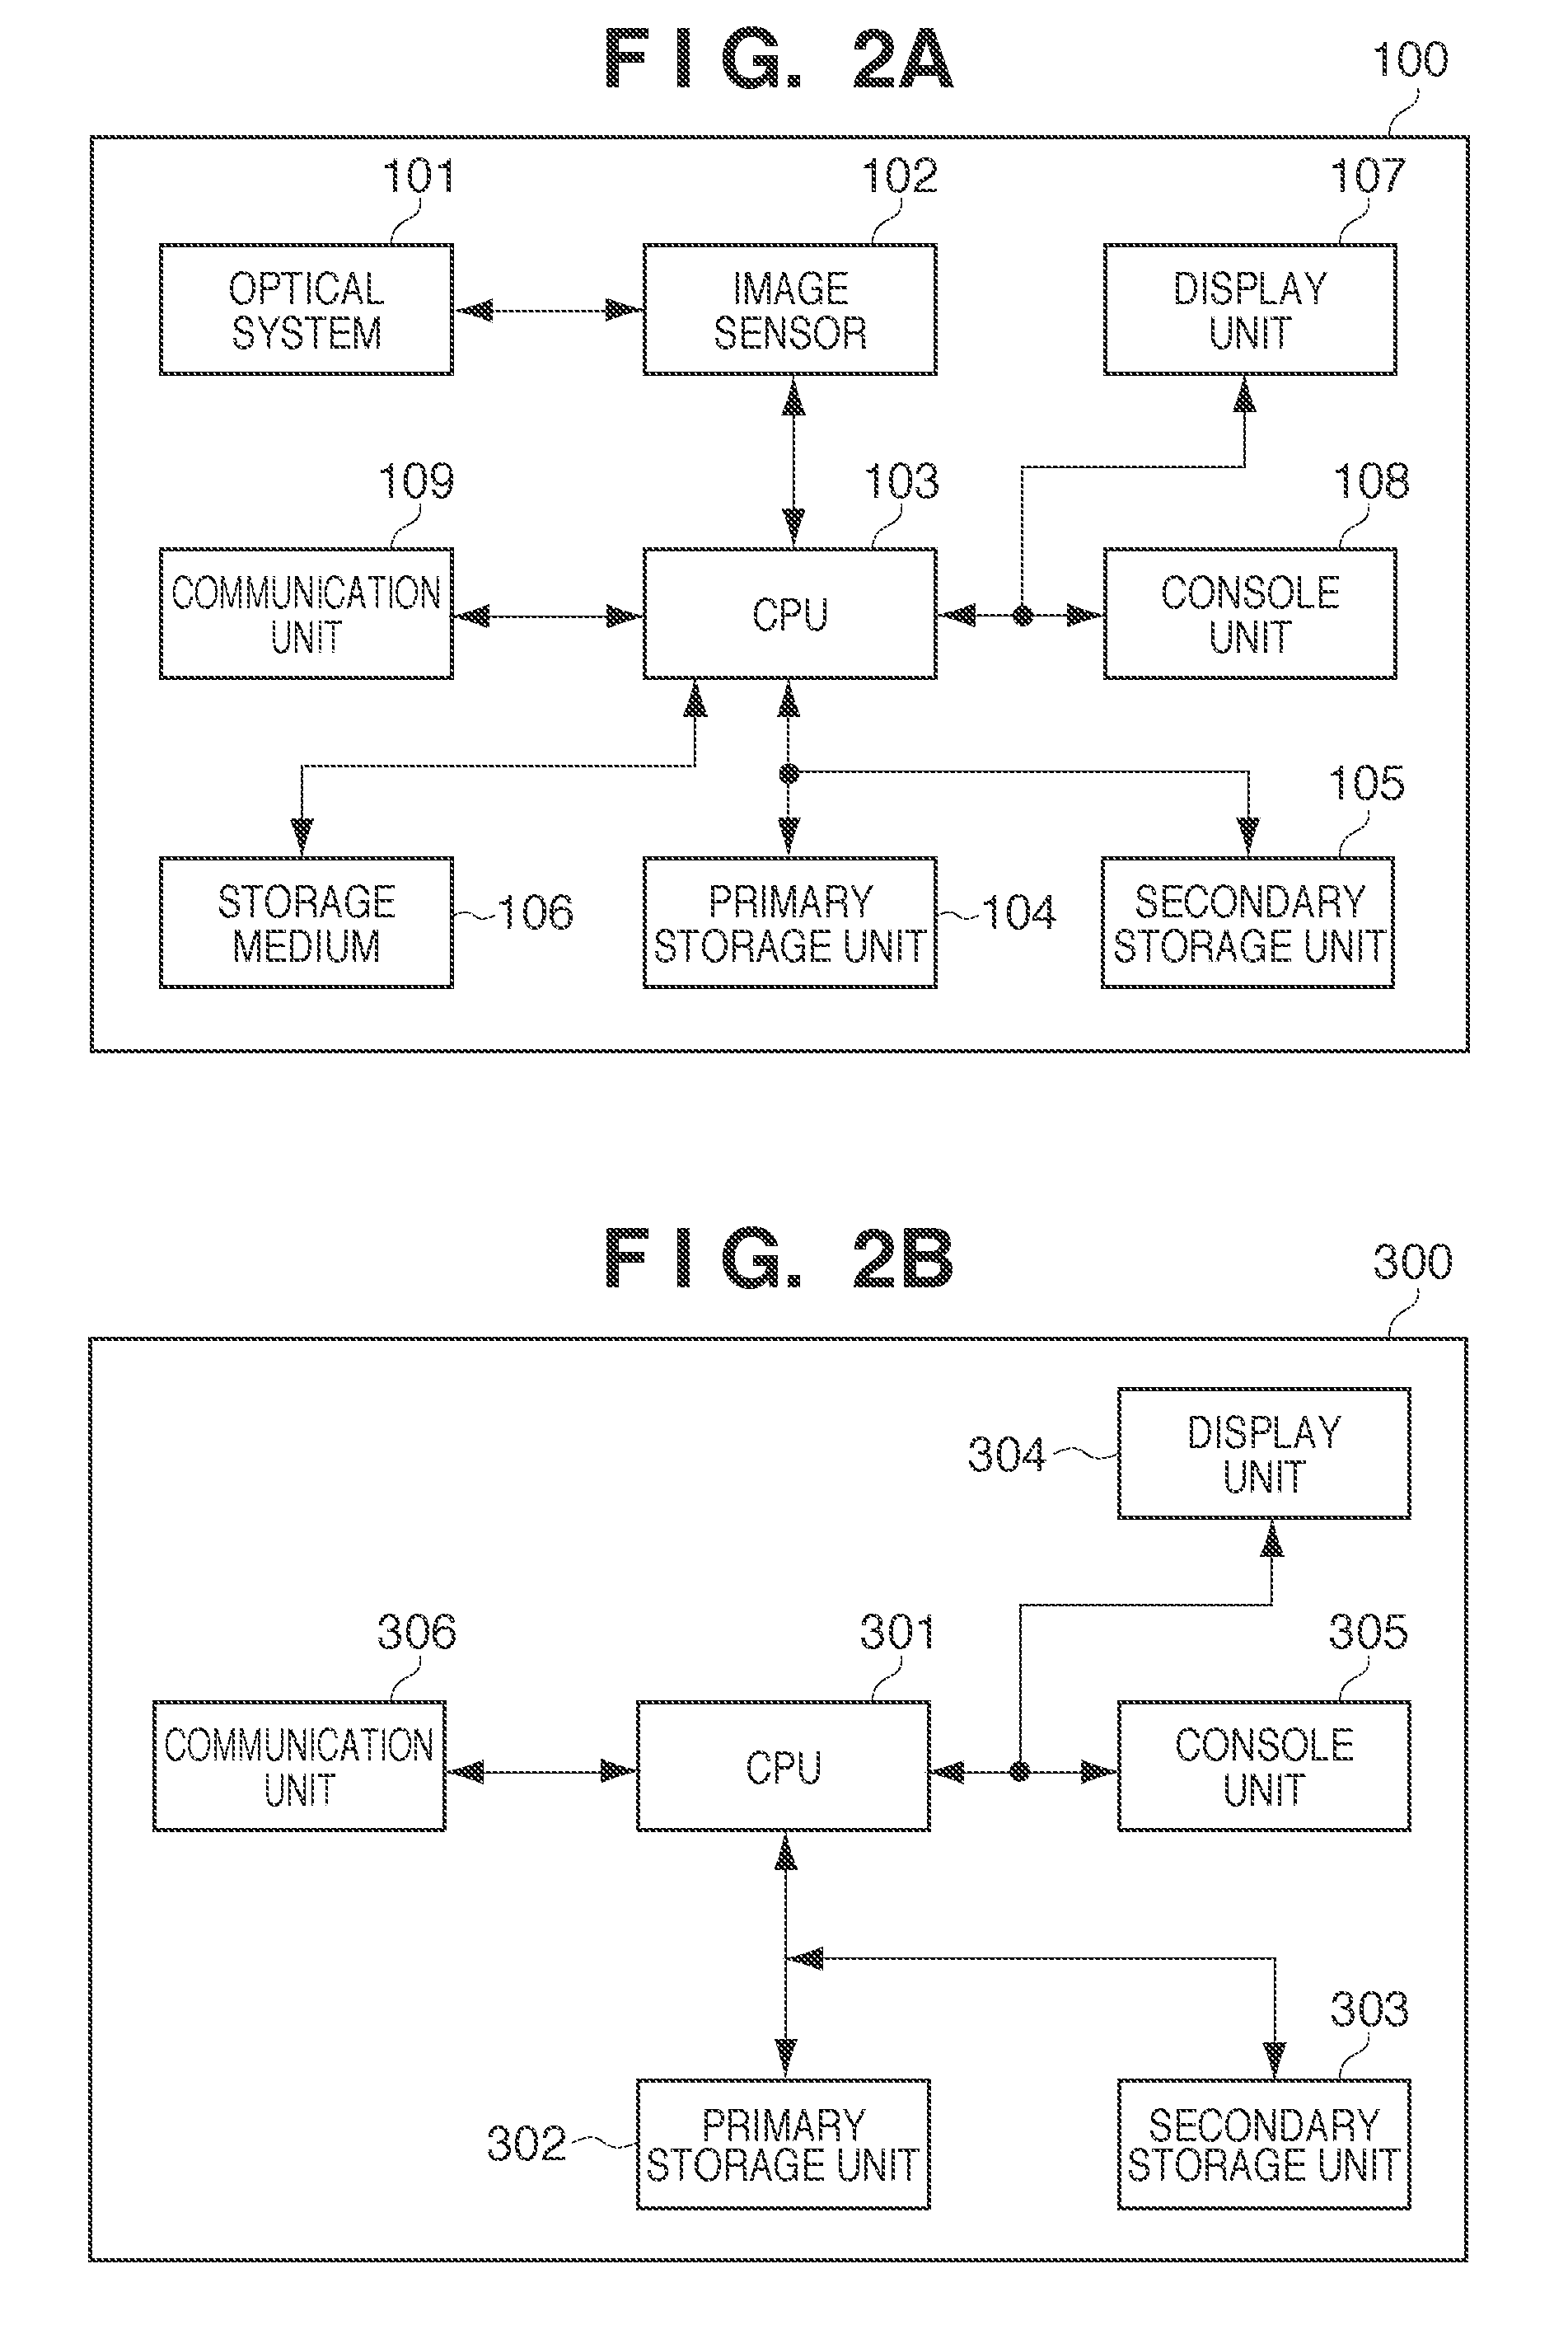 Image processing apparatus, method of controlling the apparatus and communication system